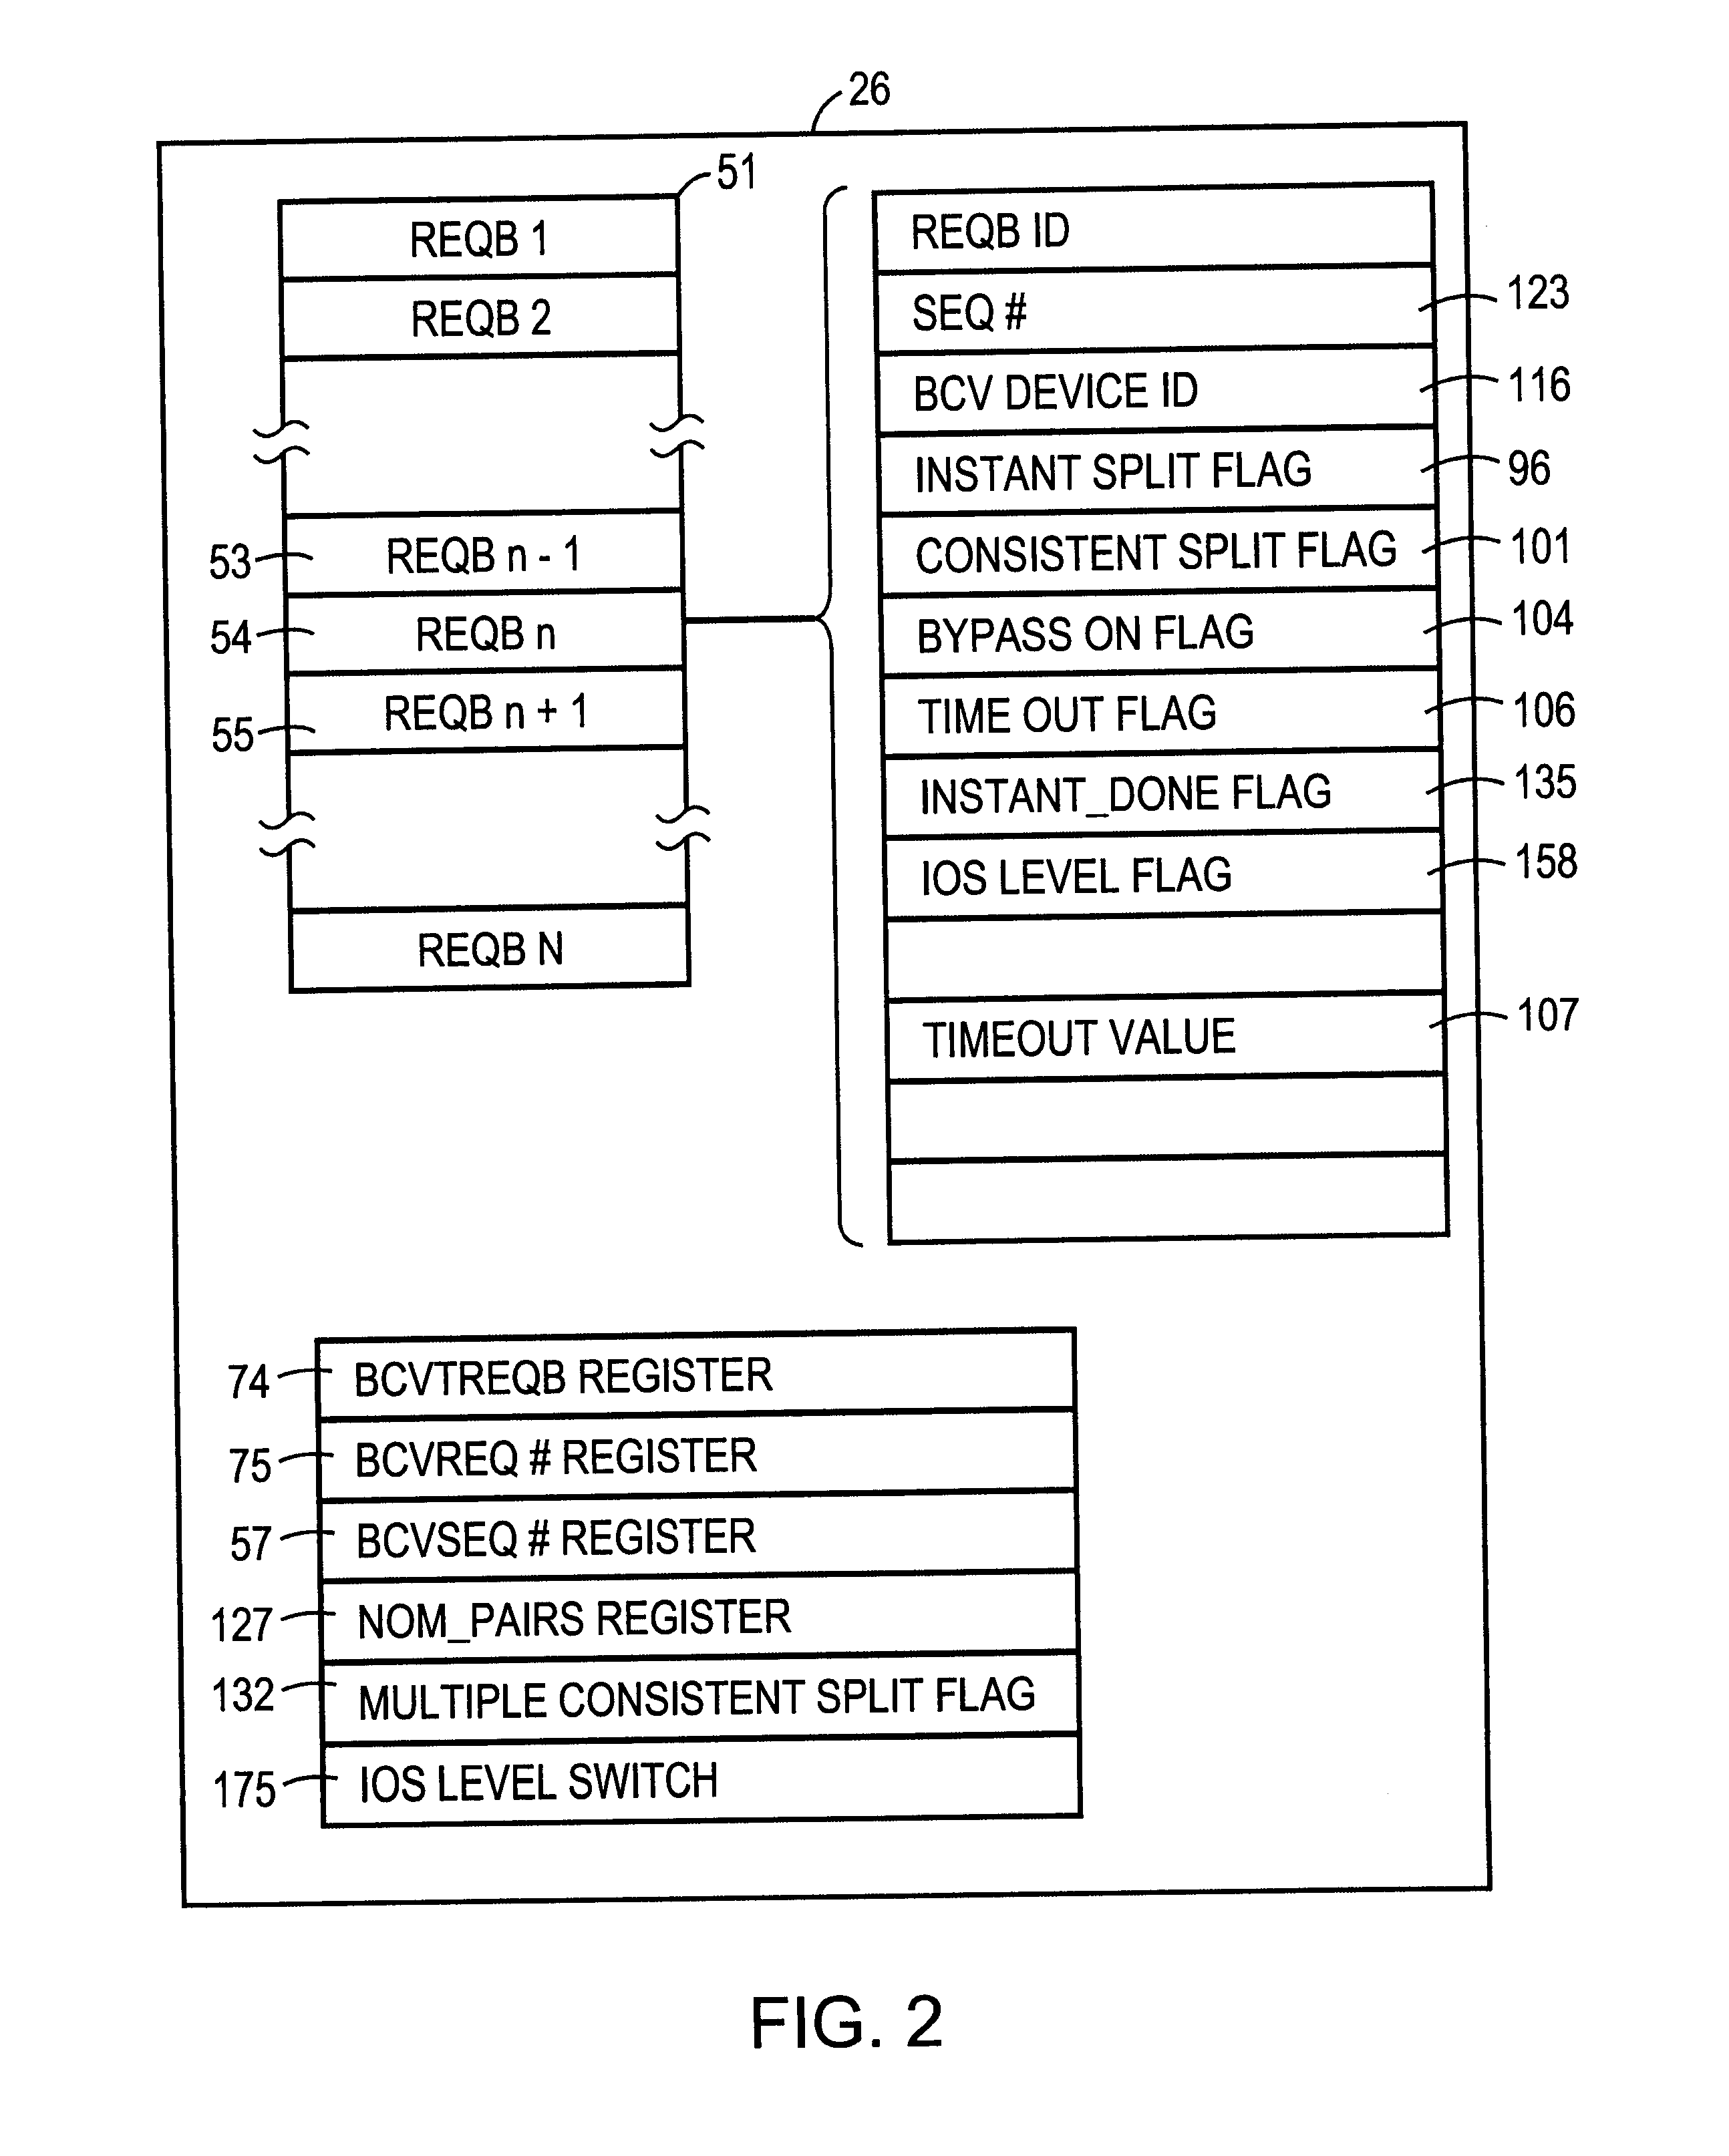 Method and apparatus for enabling consistent ancillary disk array storage device operations with respect to a main application